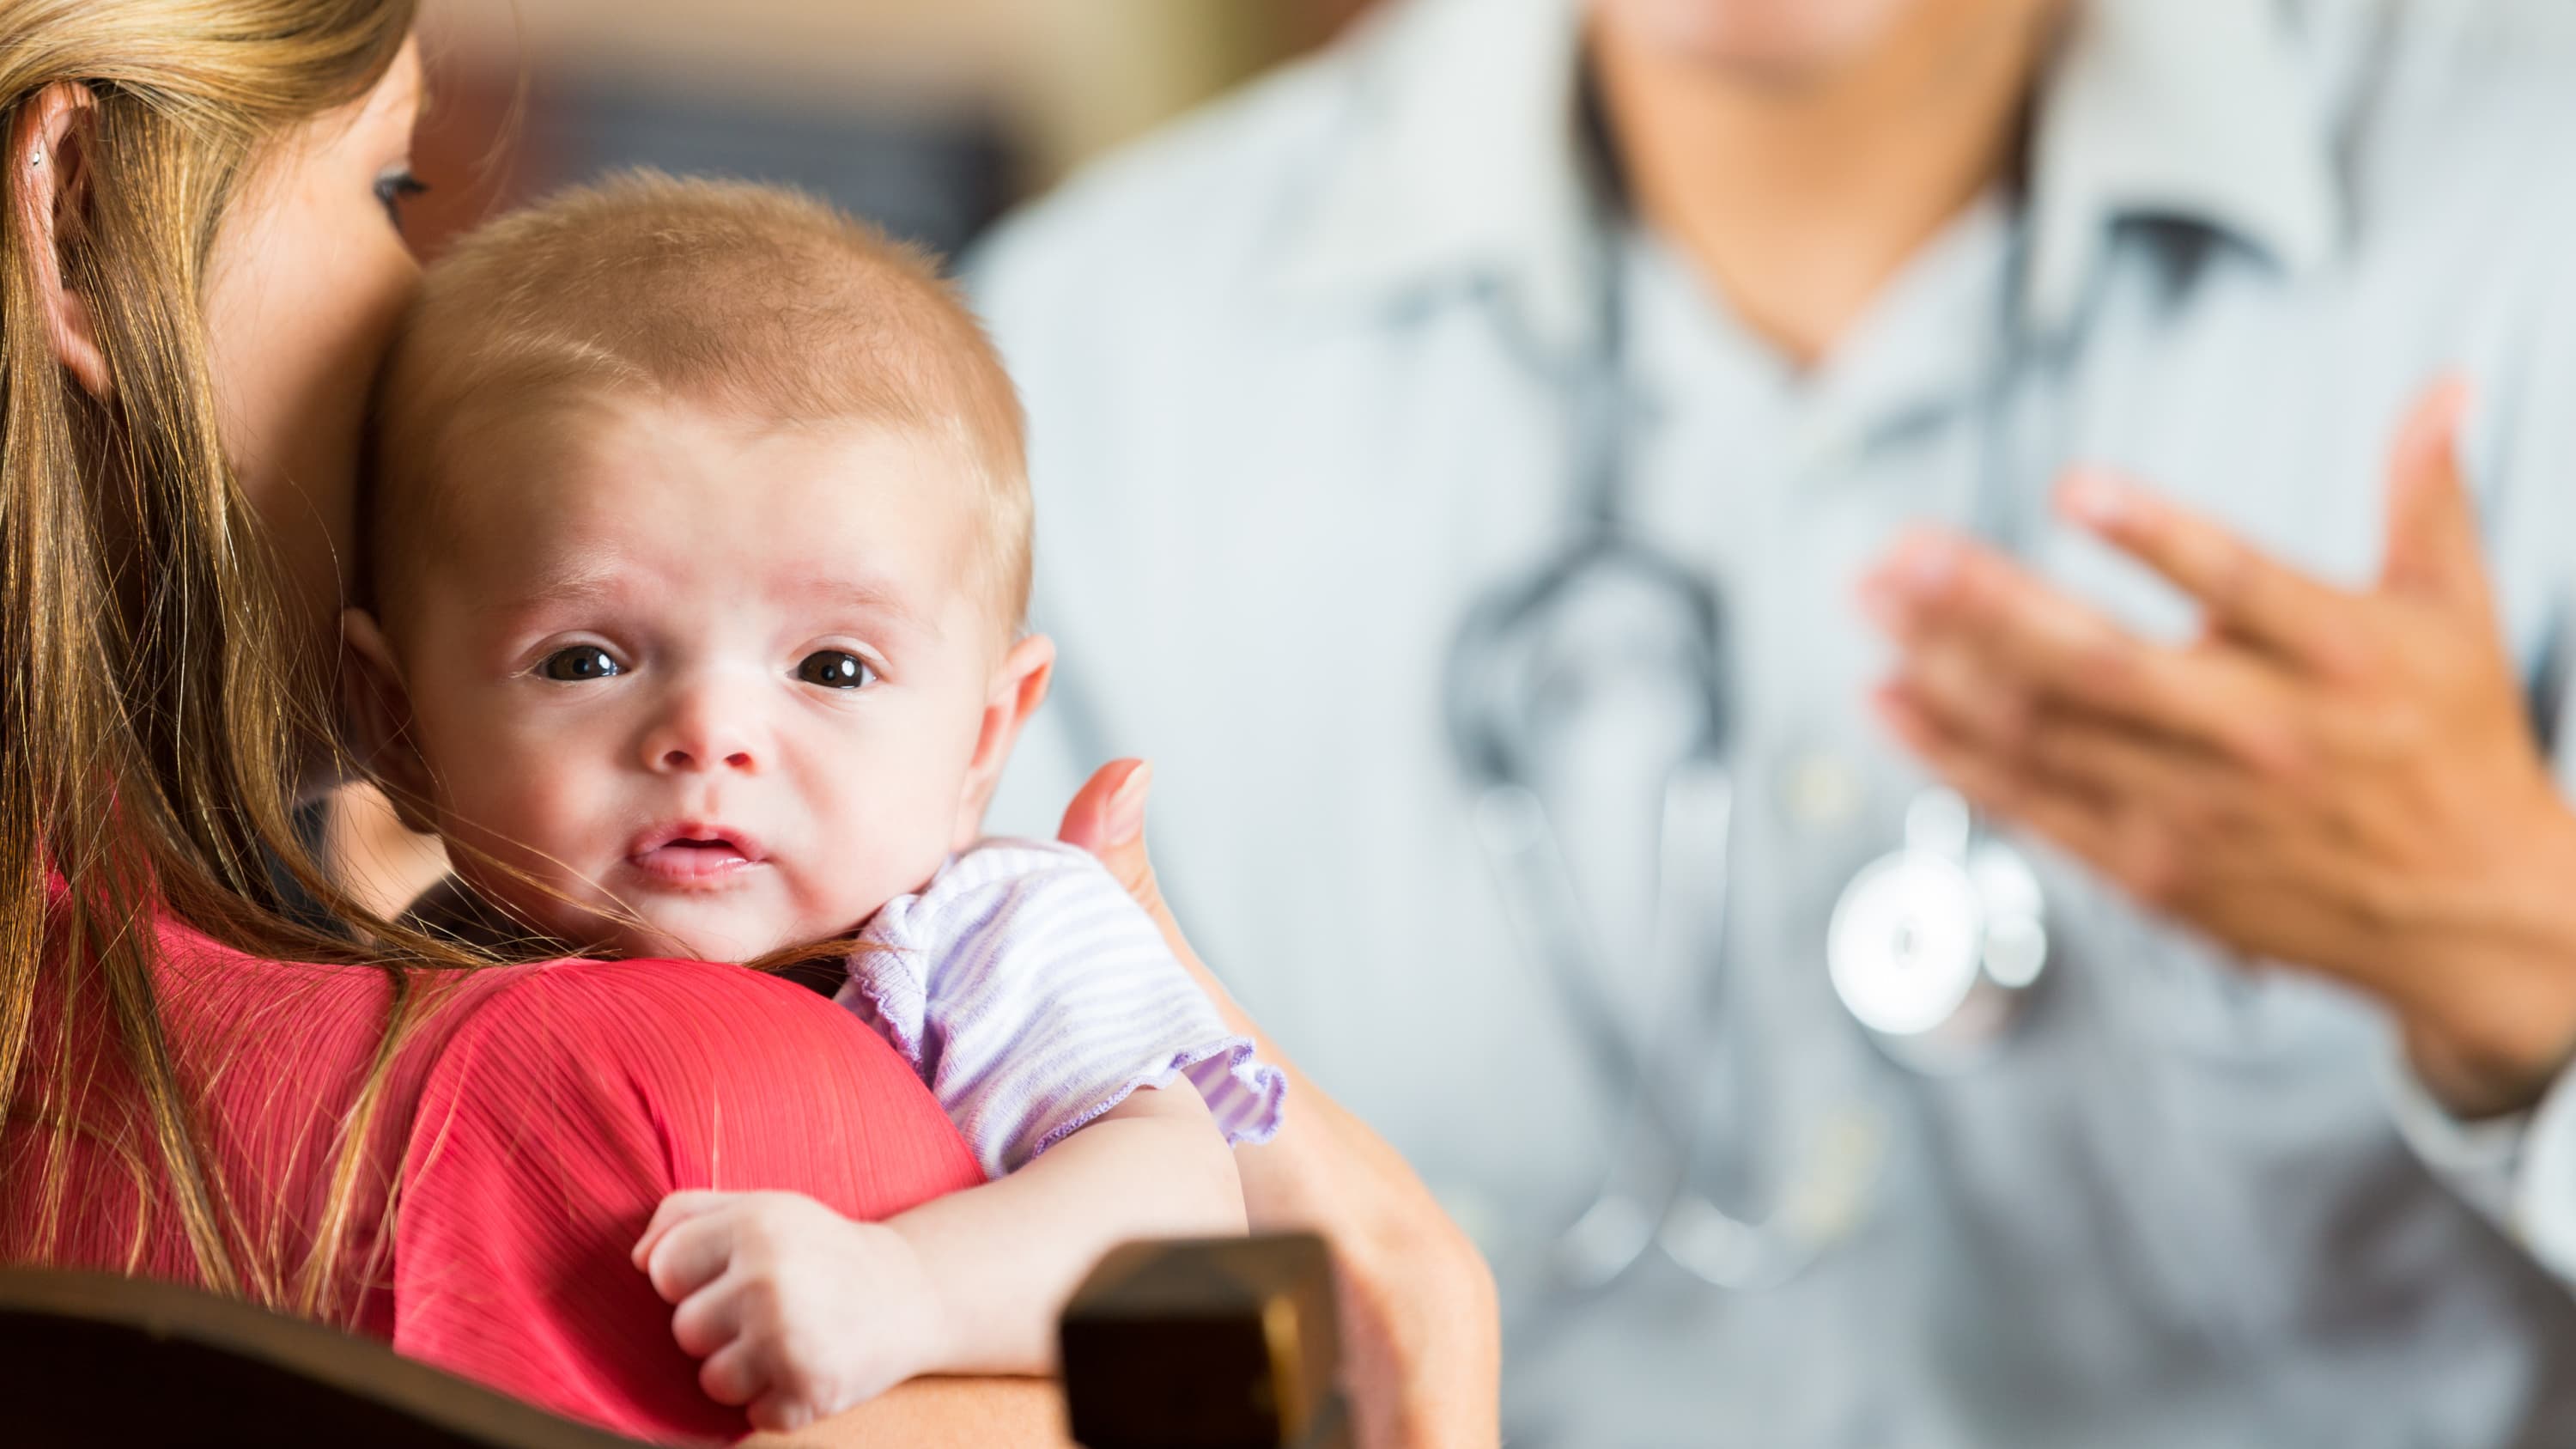 A baby with cystic fibrosis is comforted during a visit to the doctor.